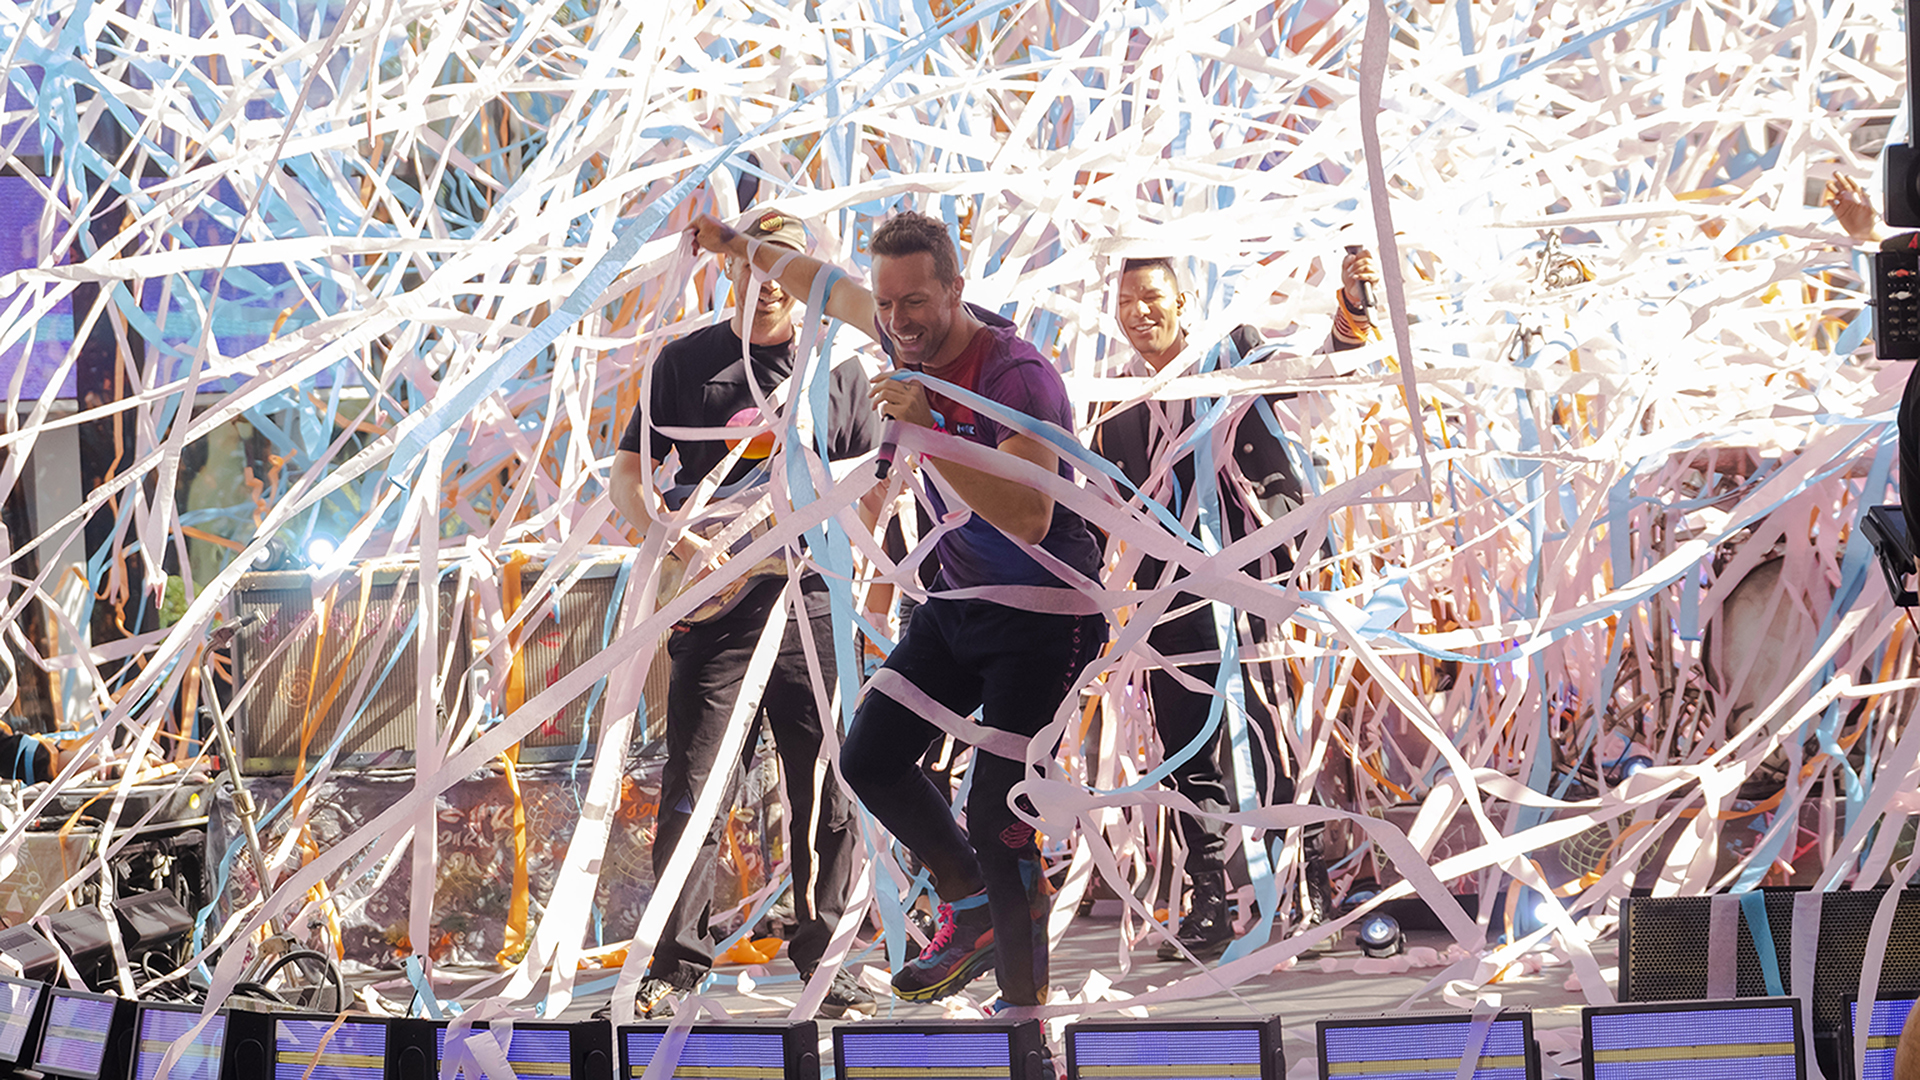 Coldplay singer Chris Martin performs surrounded by streamers